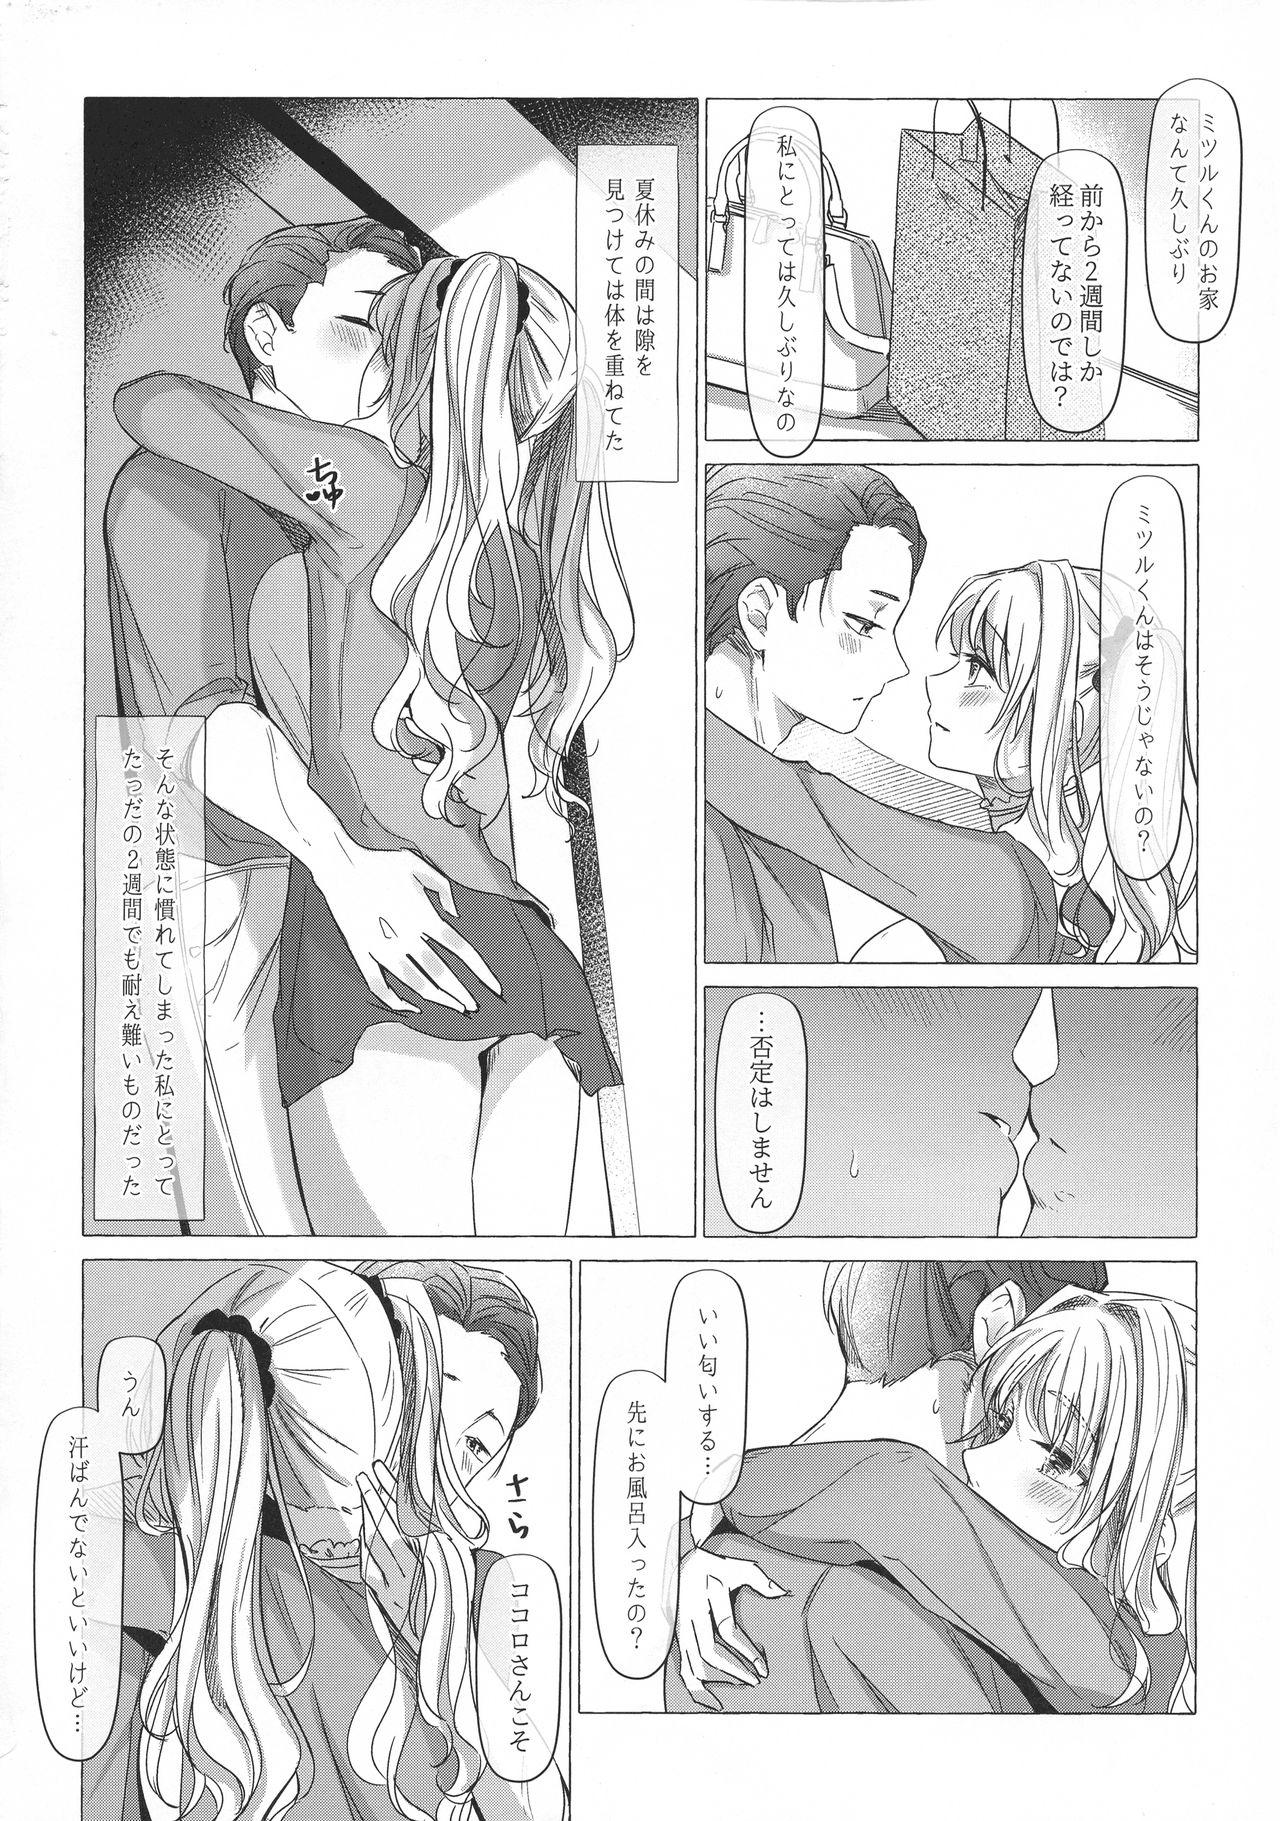 Blackmail 満心総意の躾 - Darling in the franxx Fucks - Page 11